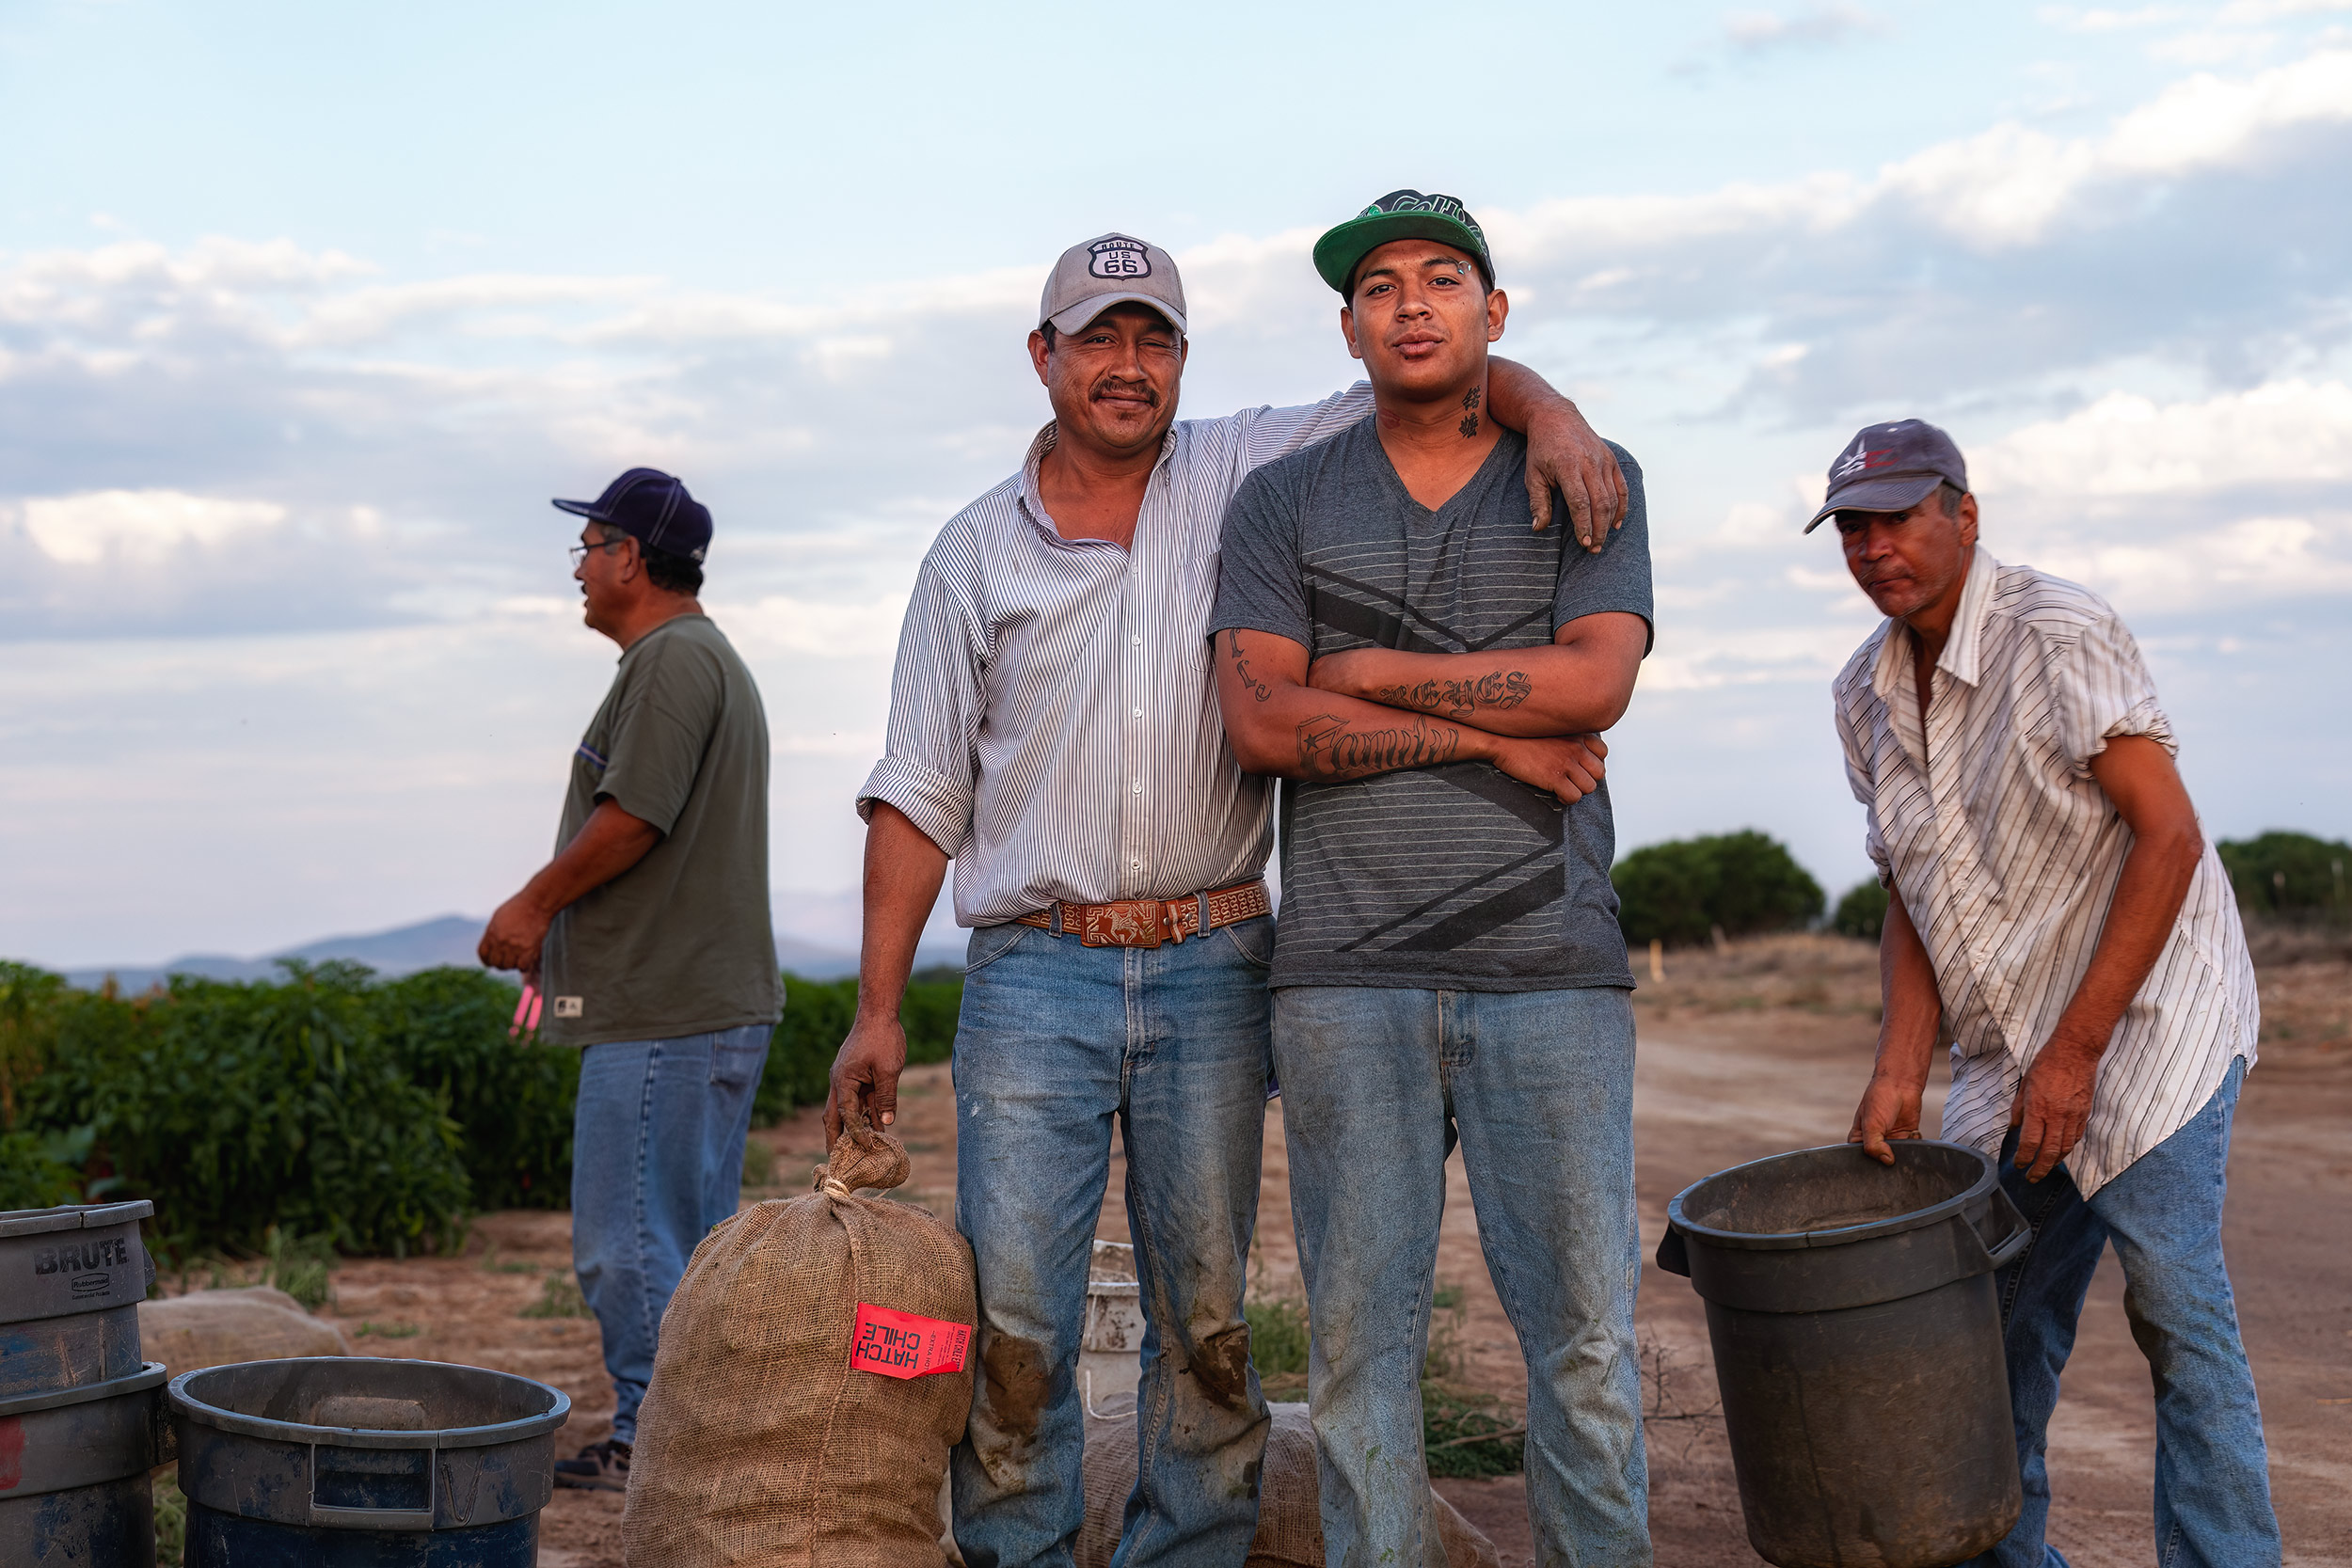 Crop workers posing for a picture at the end of the day in the field after work. agriculture photography c